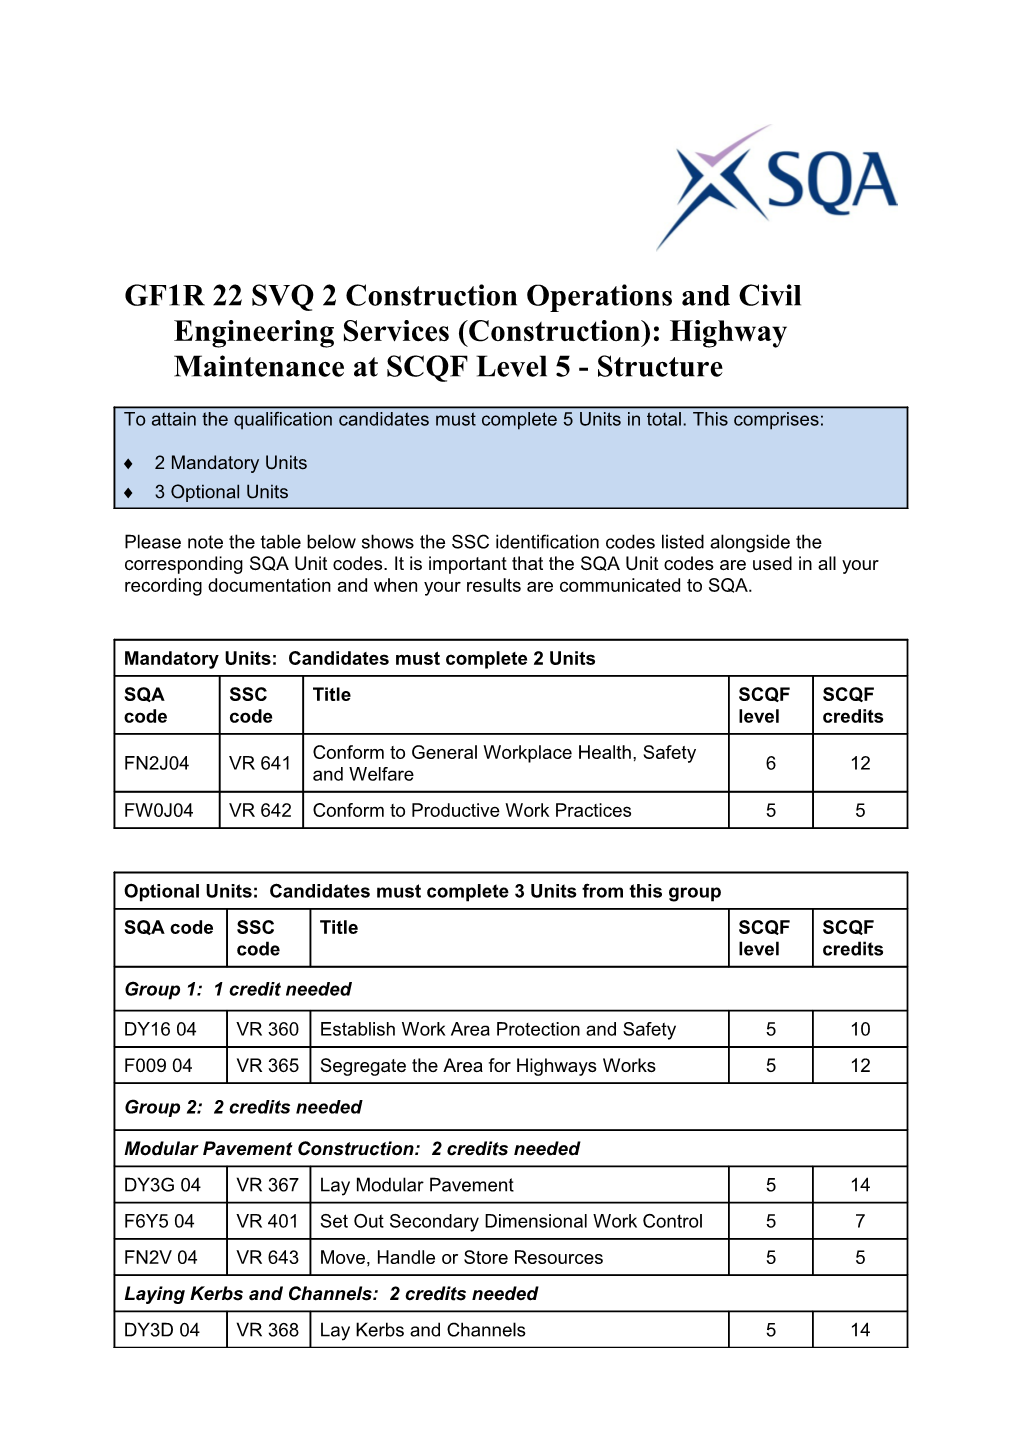 GF1R 22 SVQ 2 Construction Operations and Civil Engineering Services (Construction): Highway